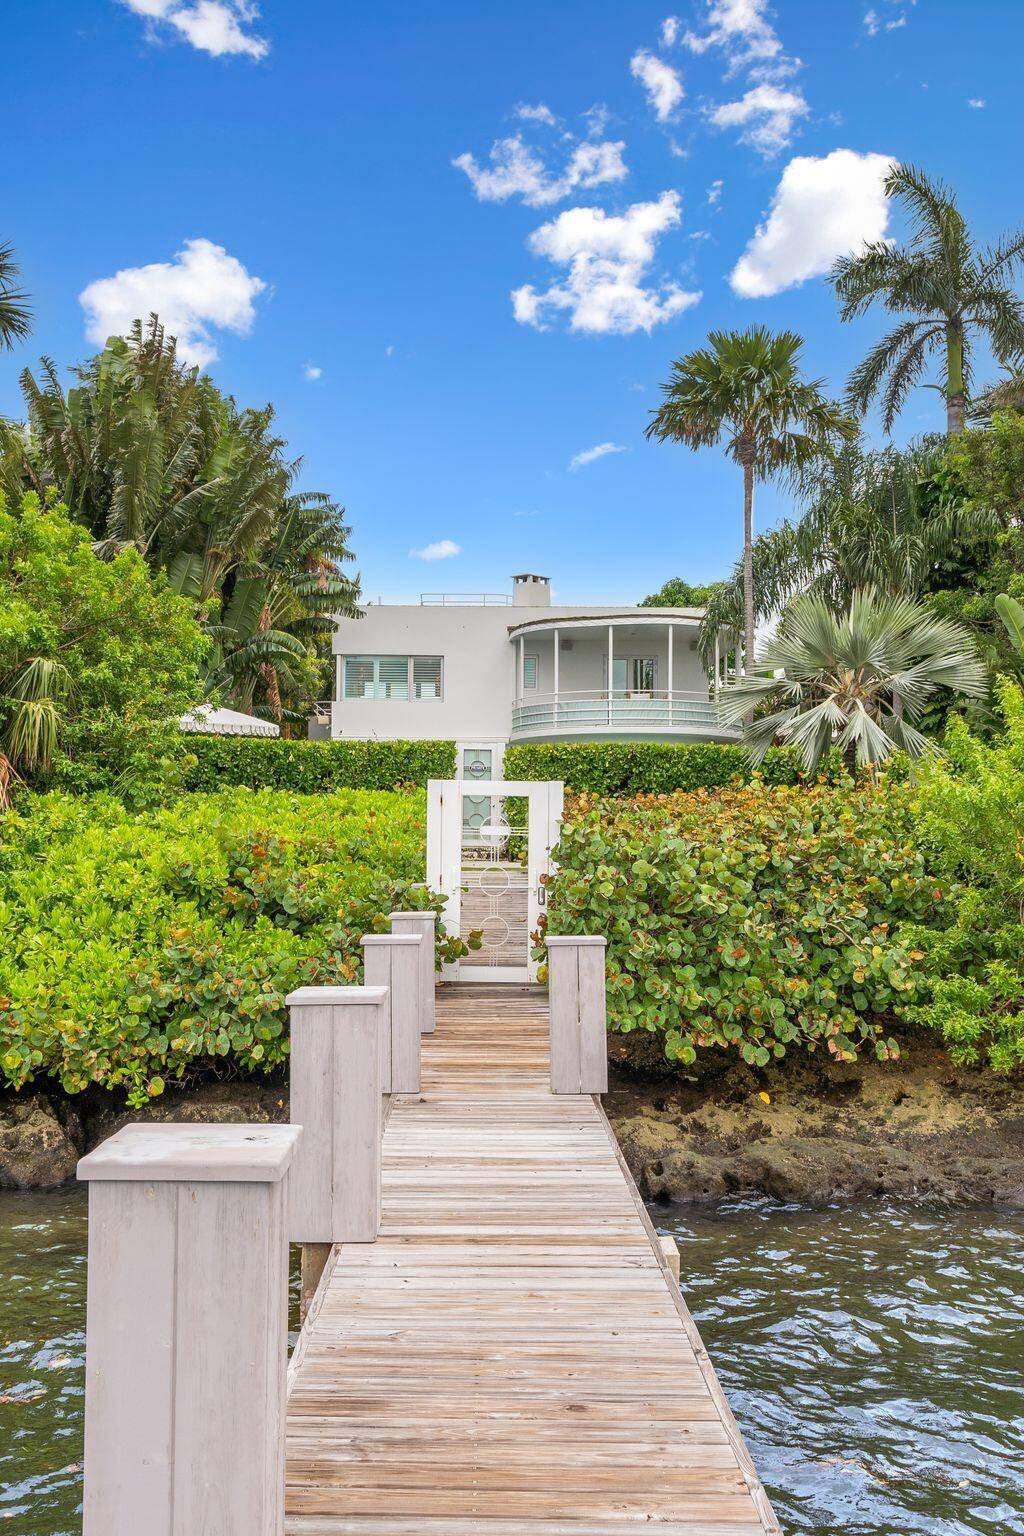 A beautifully renovated, masterful landmark of Modernist architecture, the Boat House combines the very best elements of life in Palm Beach the perfect spot on the lakefront with dock and ...